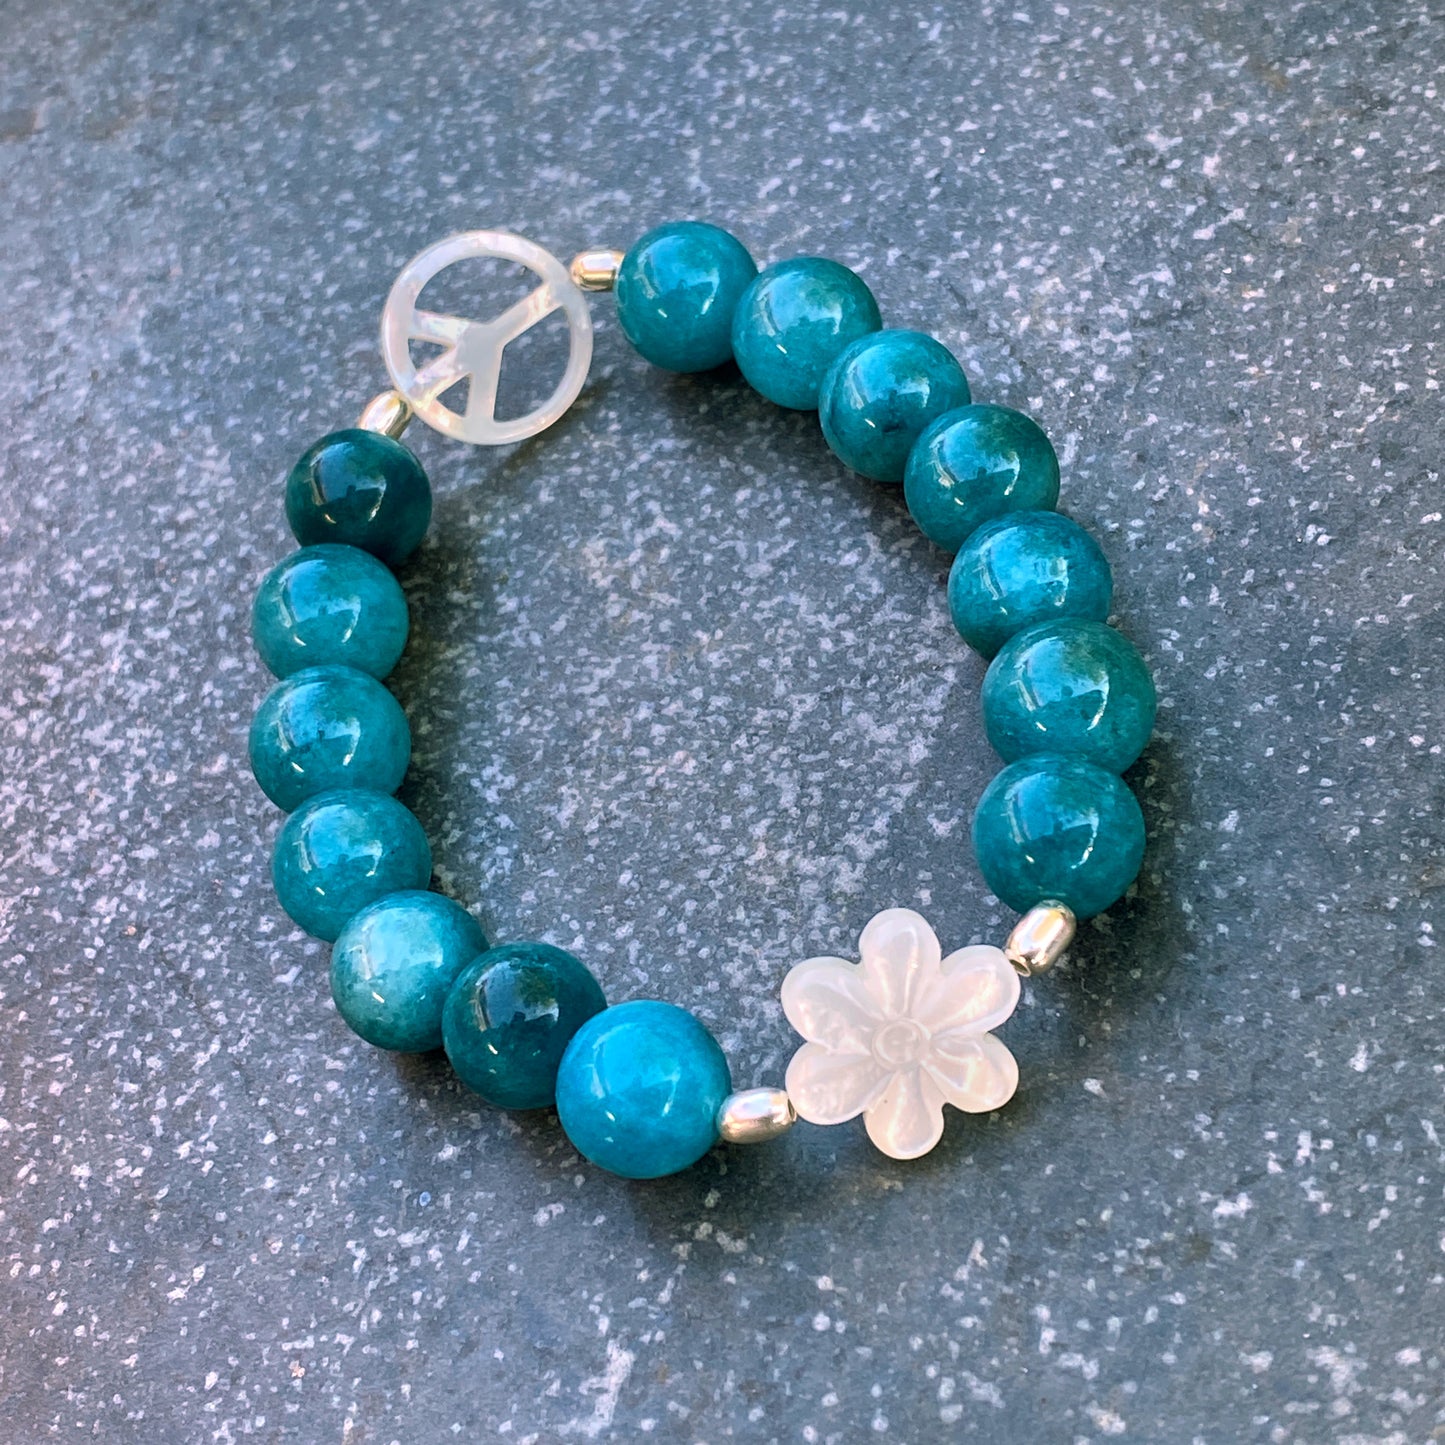 Chunky blue Apatite gemstone, Mother of Pearl, & Sterling Silver Peace Sign Bracelet